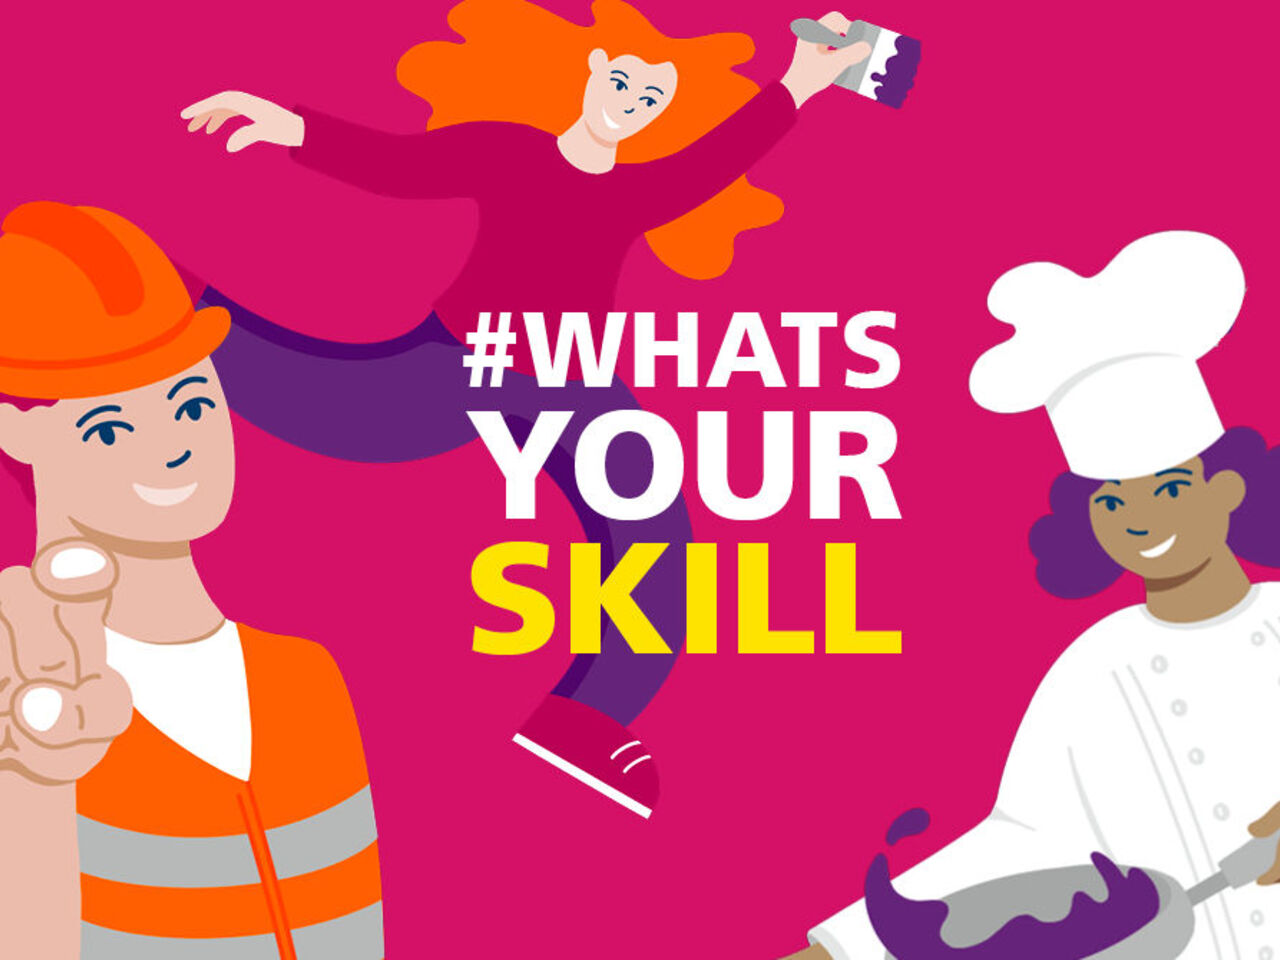 WorldSkills launches #WhatsYourSkill on TikTok ahead of World Youth Skills Day